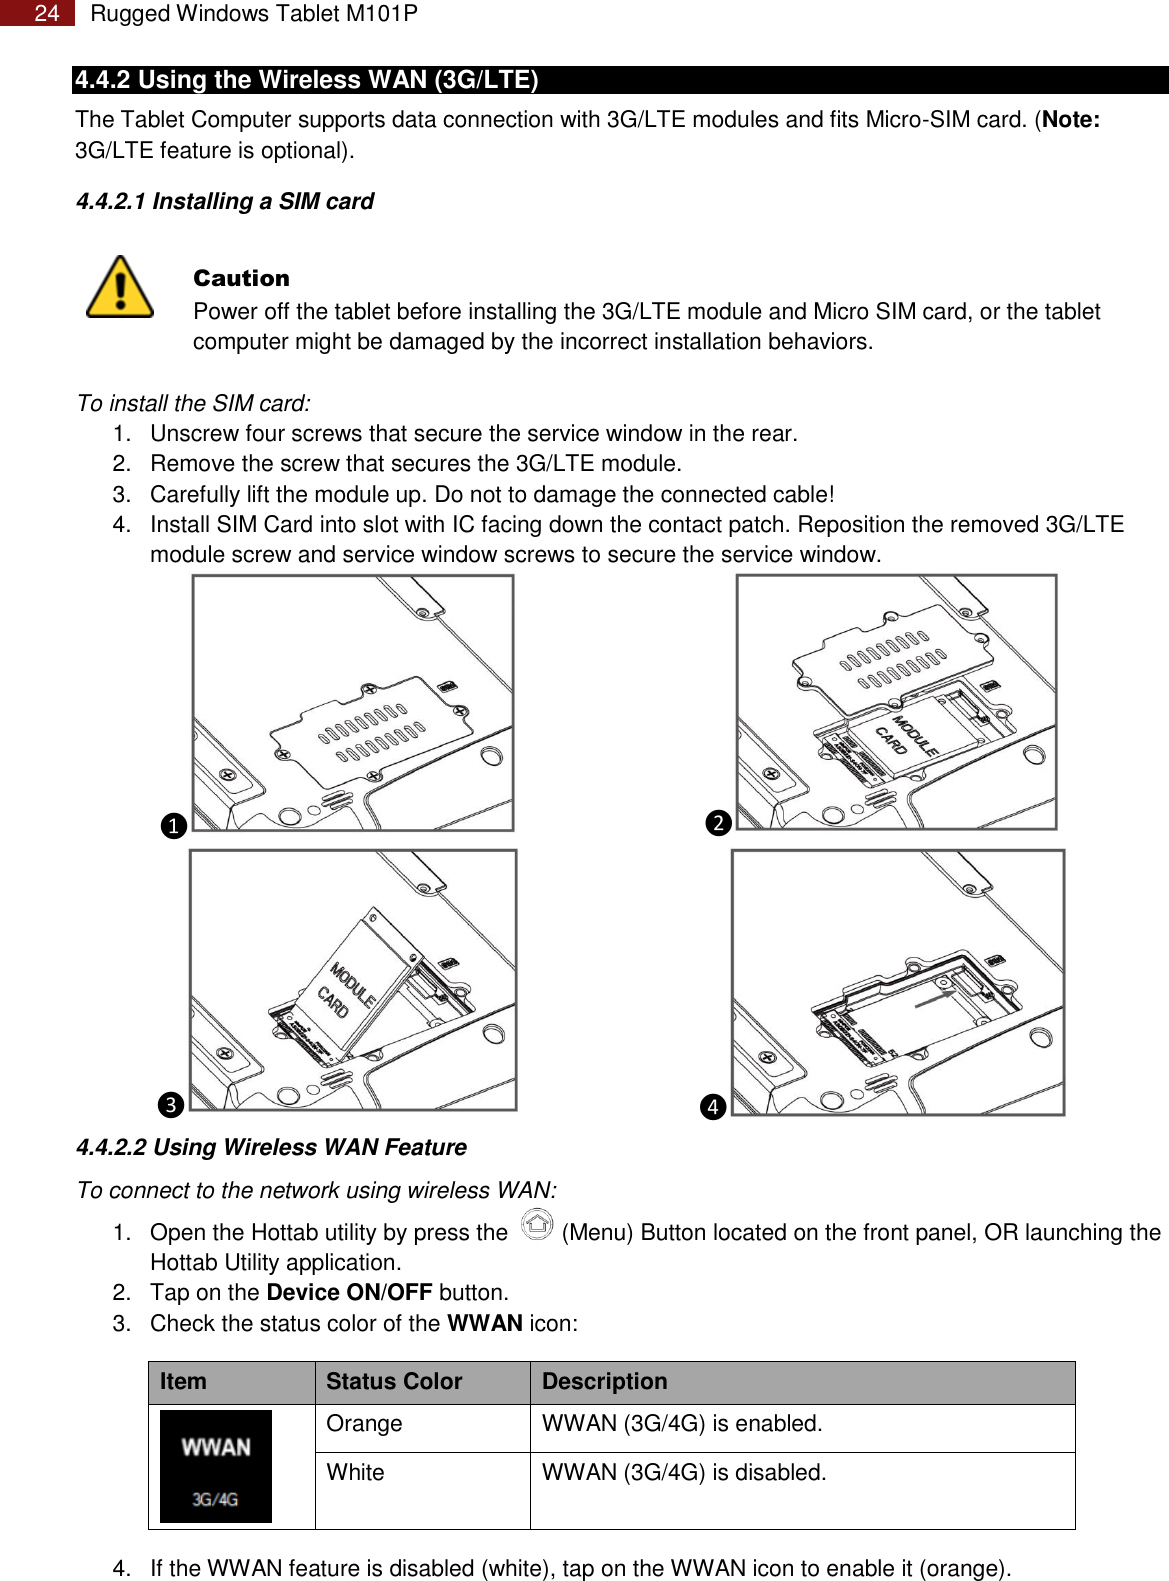 Page 24 of Winmate M101P Rugged Tablet PC User Manual Rugged Windows Tablet M101P